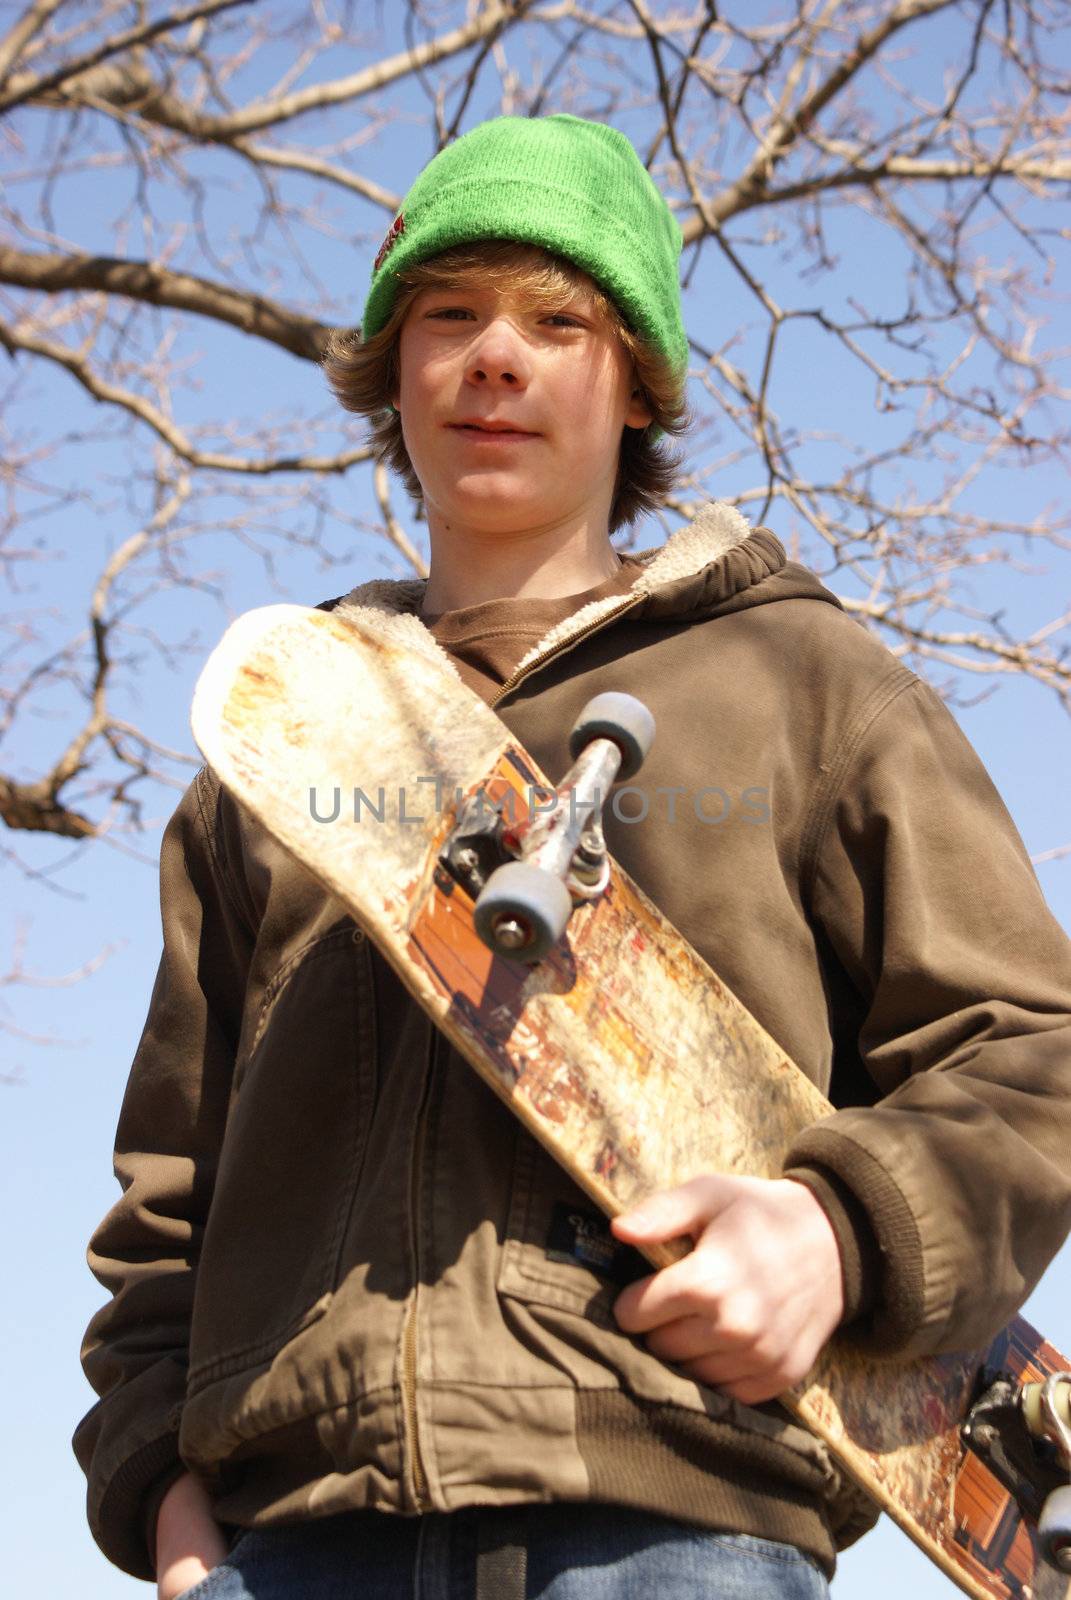 A young teen boy poses with his skateboard.